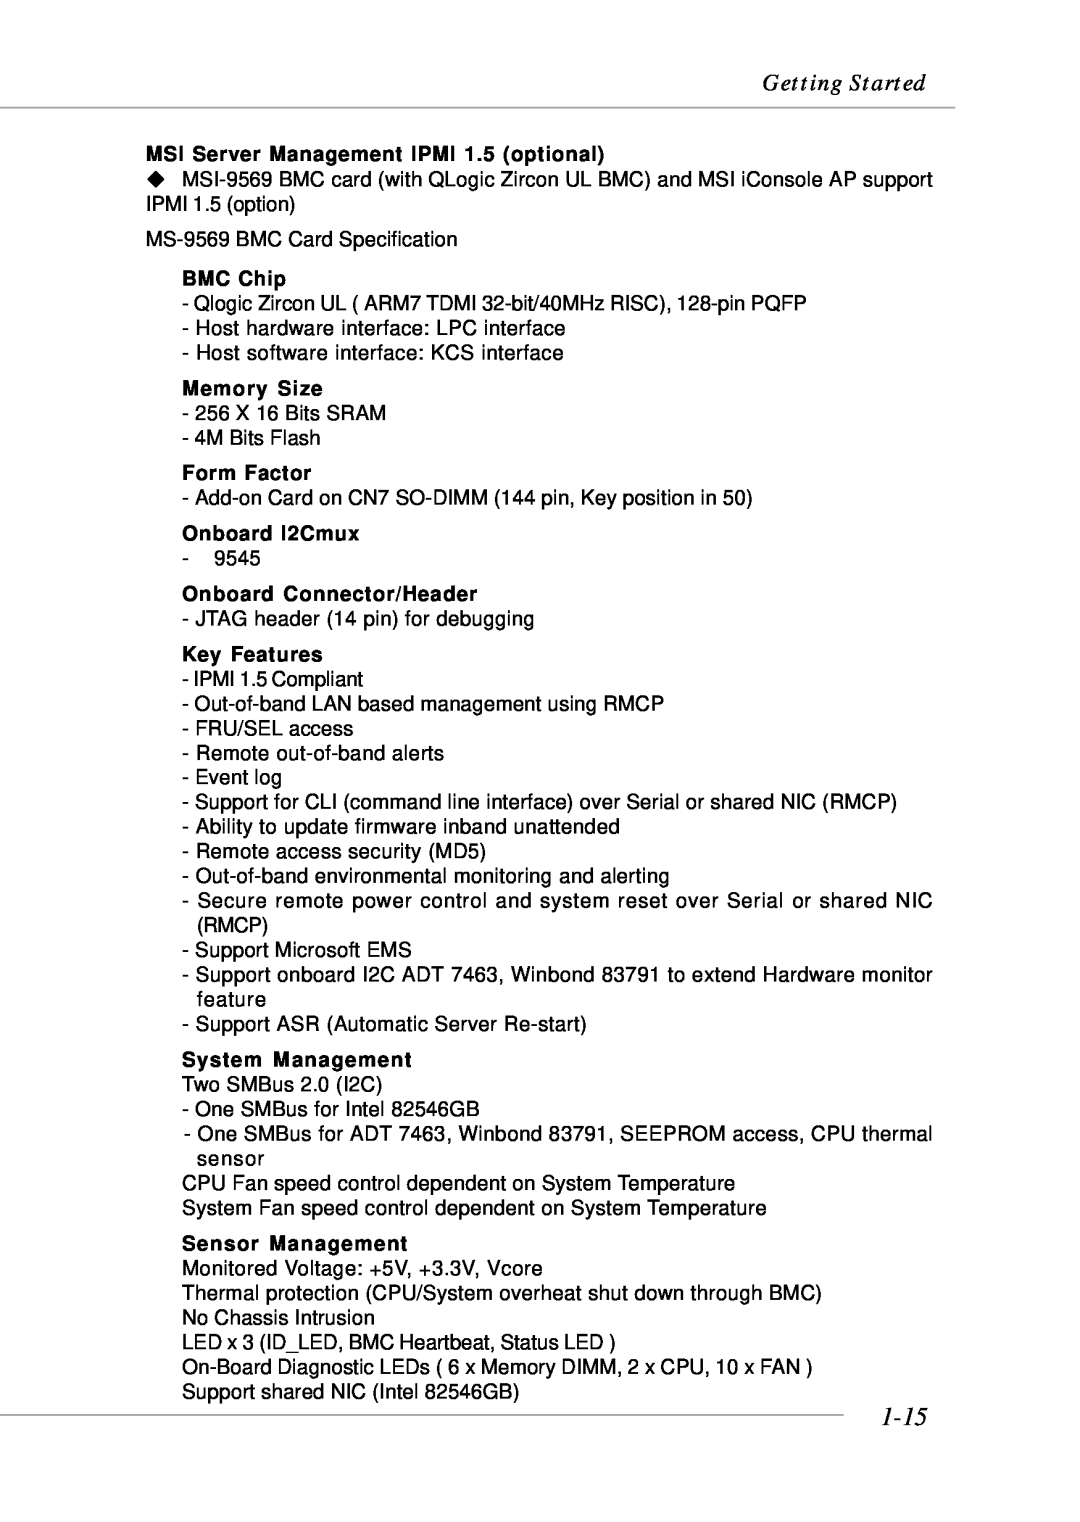 MSI MS-9246 manual 1-15, Getting Started, MSI Server Management IPMI 1.5 optional, BMC Chip, Memory Size, Form Factor 